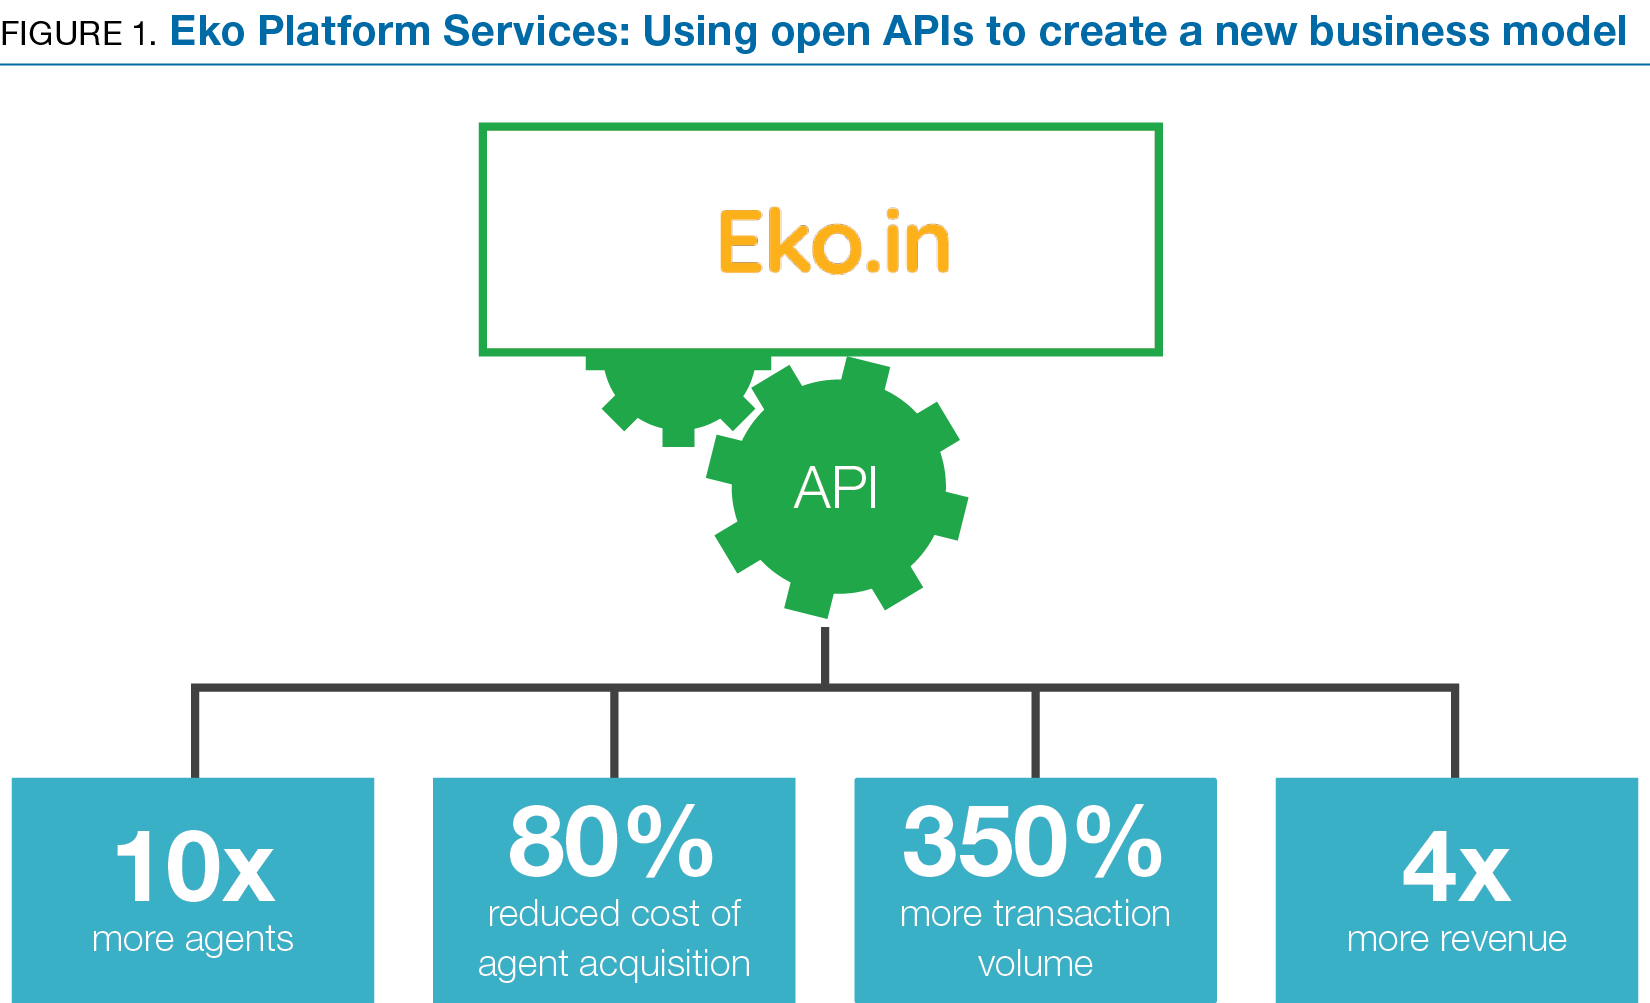 APIs helped Eko increase agent networks 10x, reduce cost of agent acquisition 80%, drive up transaction volume 350%, and increase revenue 4x.